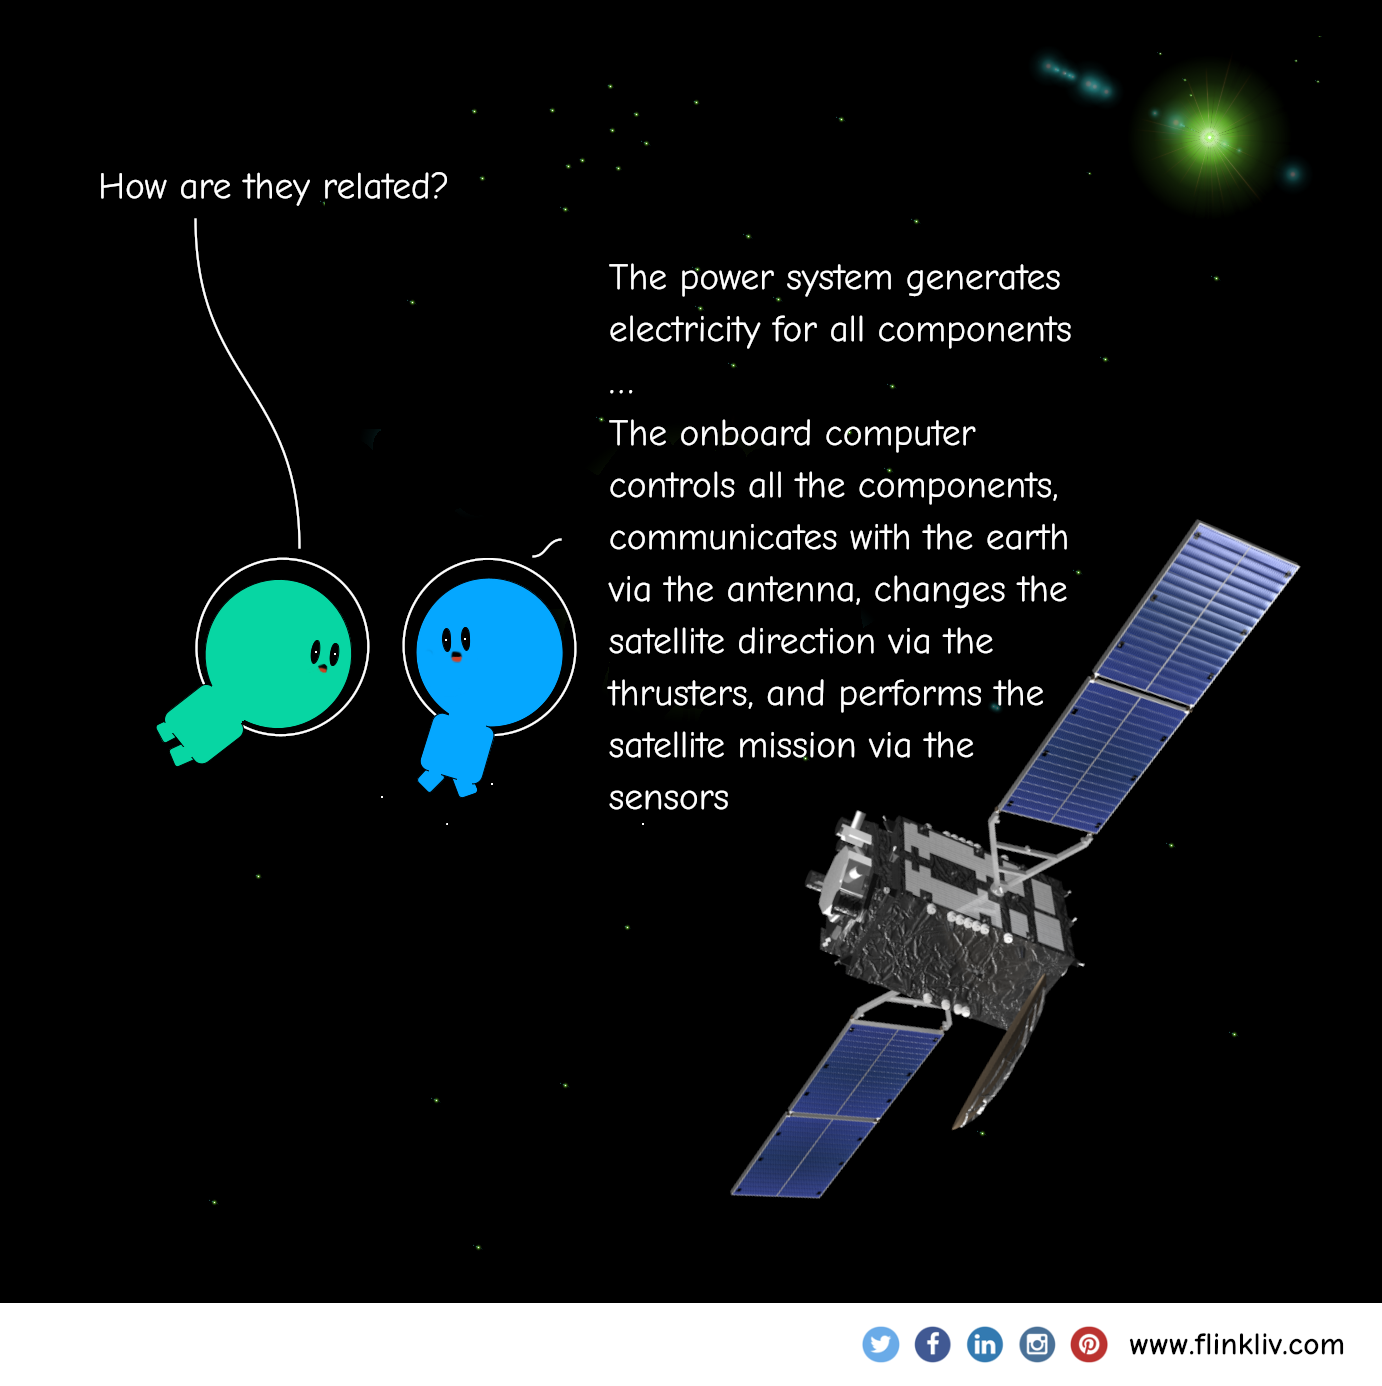 Conversation between A and B about Relationships.
          A: How are they related?
          B: The power system generates electricity for all components. The onboard computer controls all the components, communicates with the earth via the antenna, changes the satellite direction via the thrusters, and performs the satellite mission via the sensors.
          
